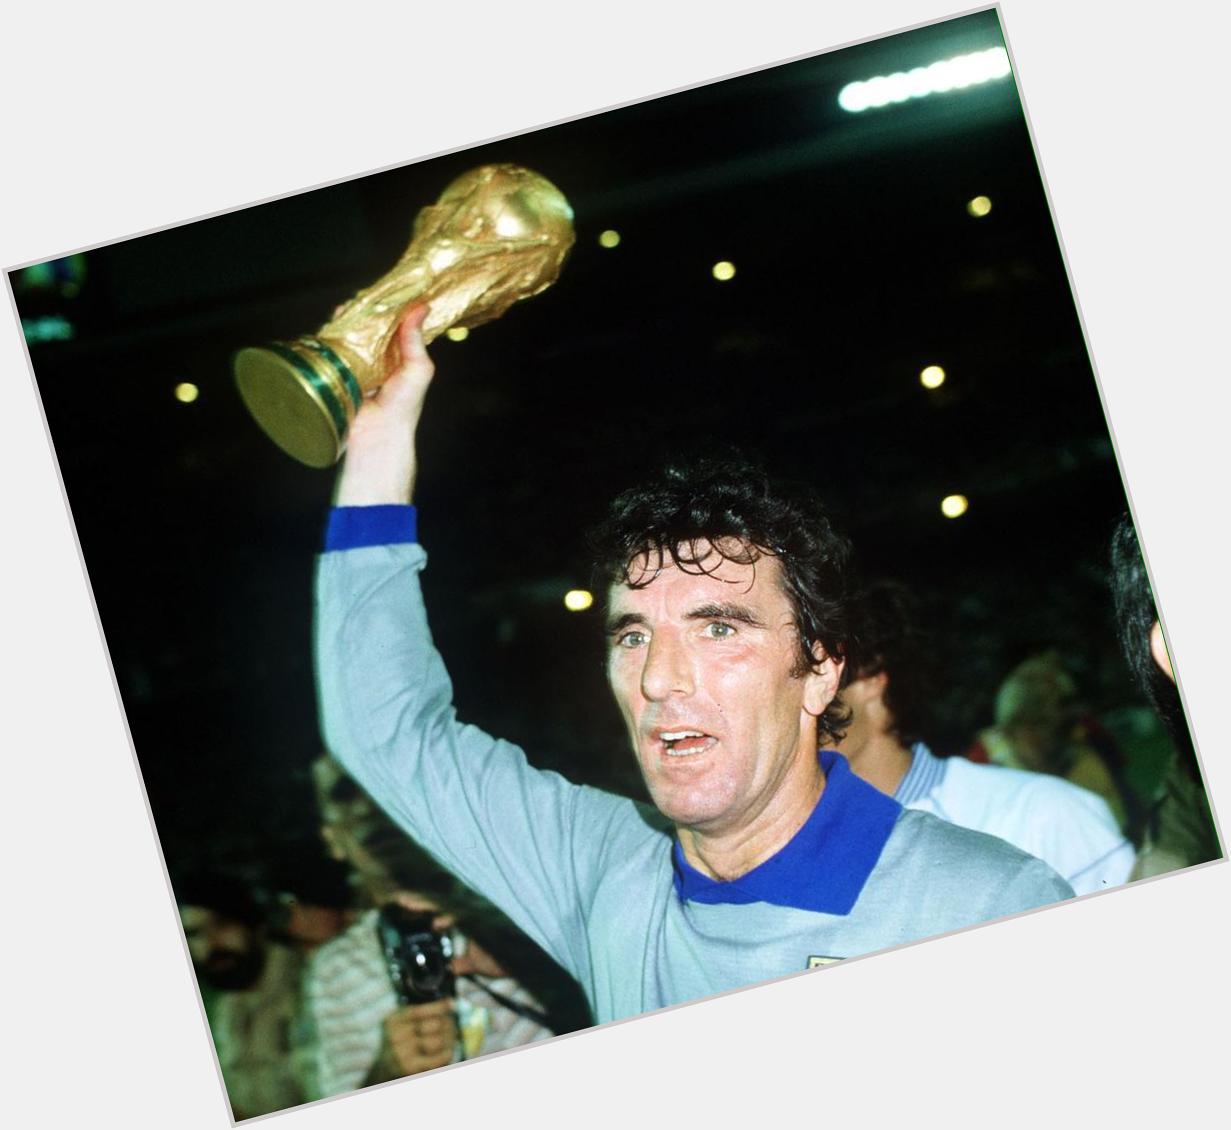 Happy birthday Dino Zoff! Legendary GK is oldest player to appear in Final! He turns 73 